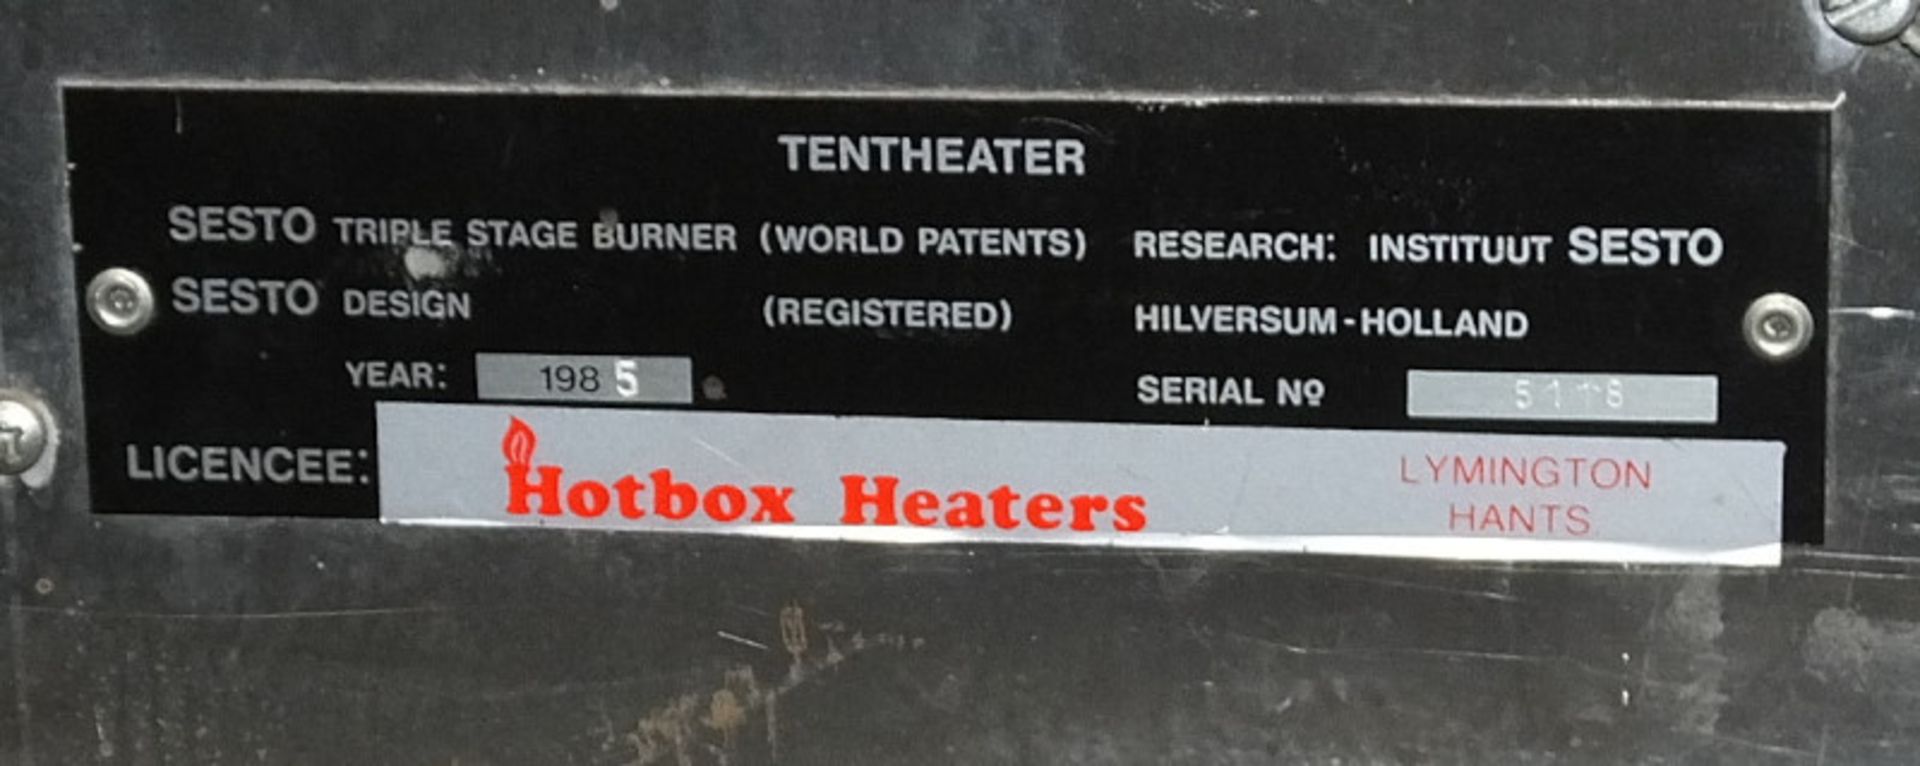 HotBox Heaters Tent Heater GHS III - NSN 4520-99-130-6045 Output - 5-15kW, Ex-MOD specific - Image 7 of 10